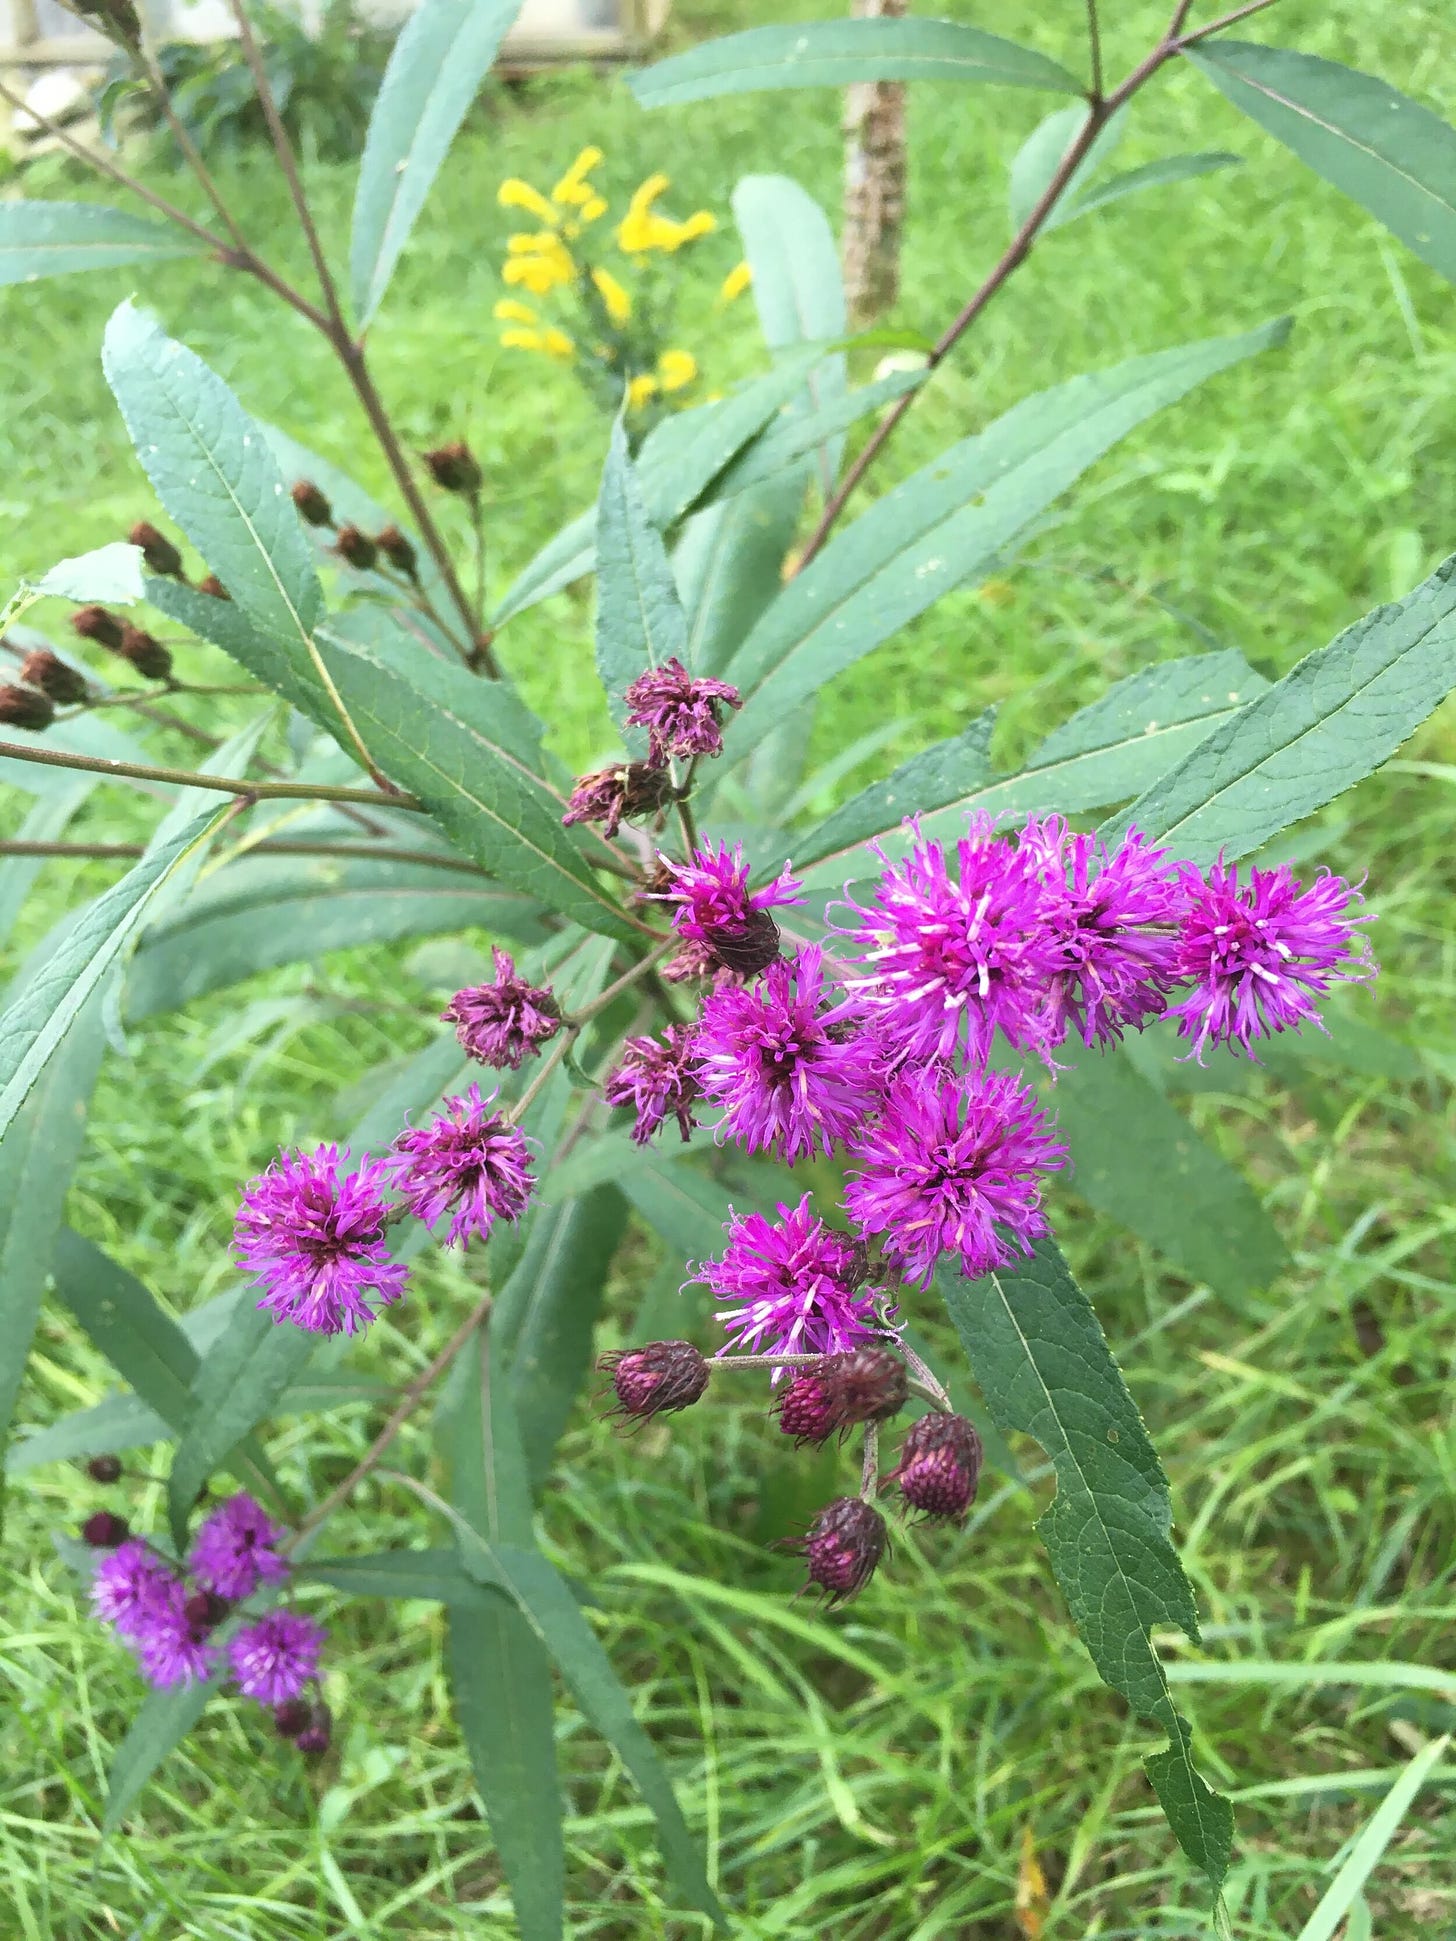 Ironweed flowers with goldenrod in the background.